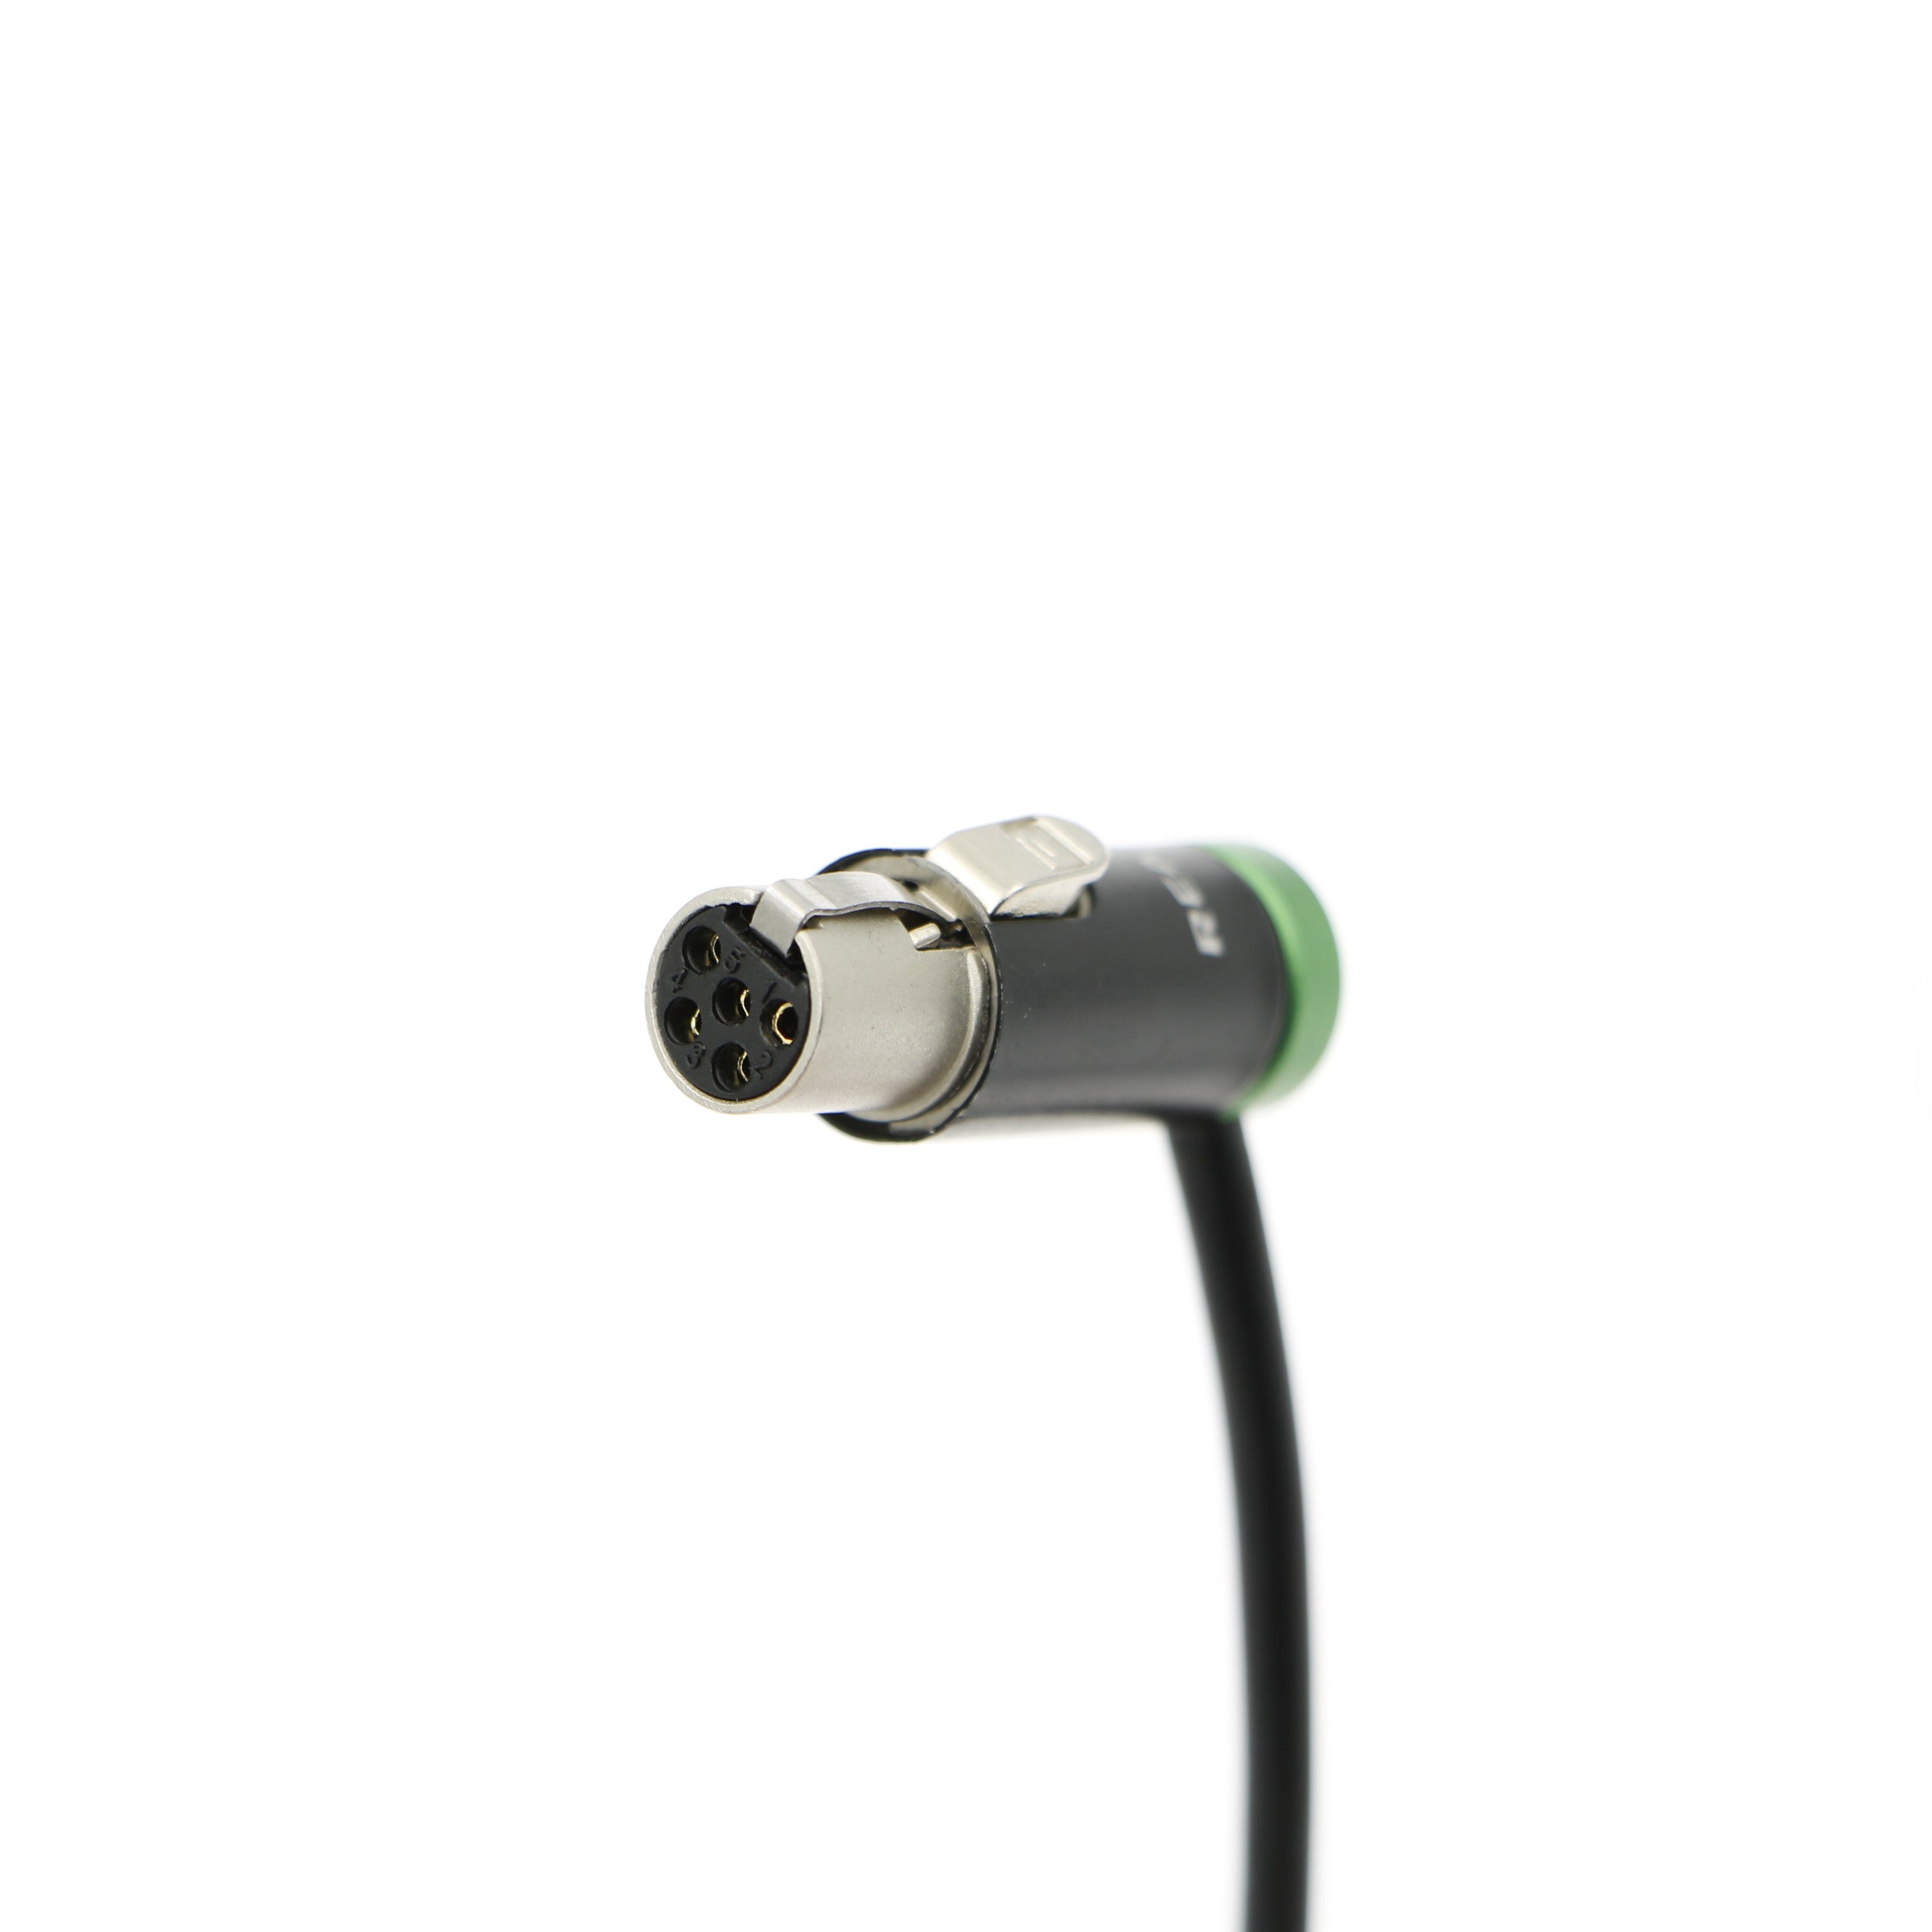 Alvin’s Cables TA5F to Dual Low-Profile XLR Audio-Cable for Wysicom-MCR54, Lectrosonics-DCHR-Receiver TA5-F to Dual XLR 3pin Output Cable for SR Slot-In Receiver